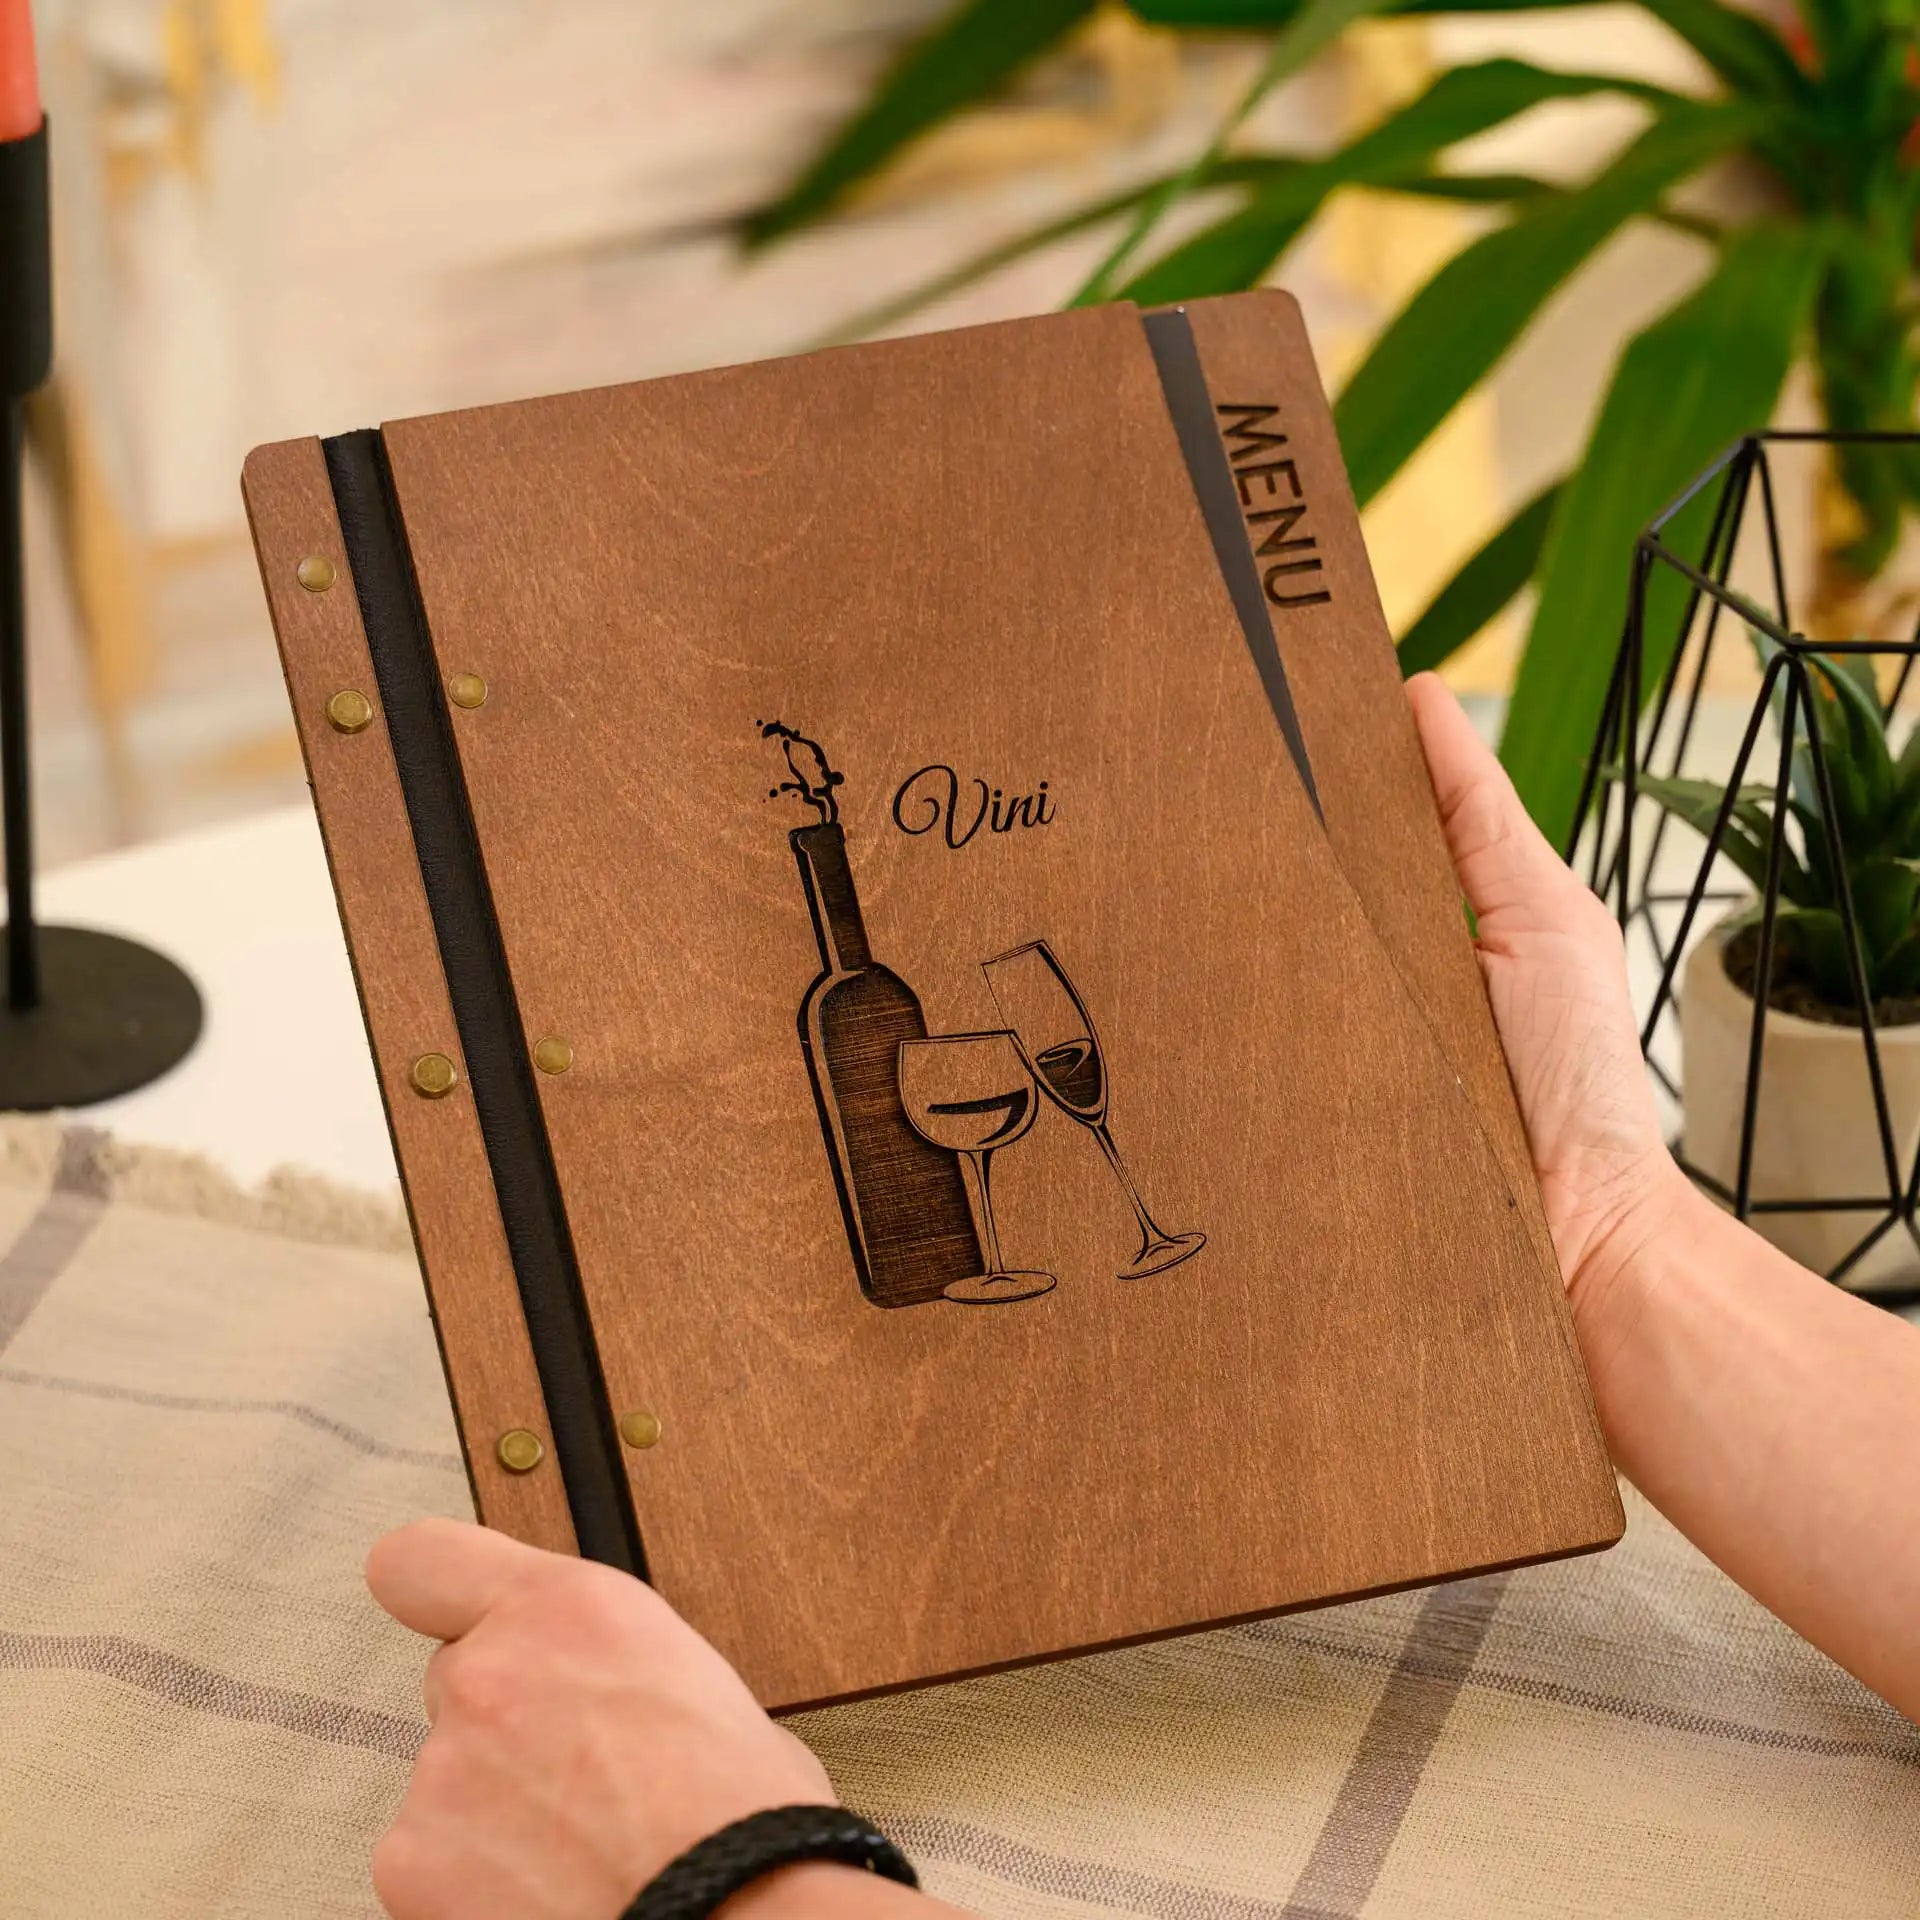 Versatile Menu Holder: Organize menus with style and ease for efficient service.